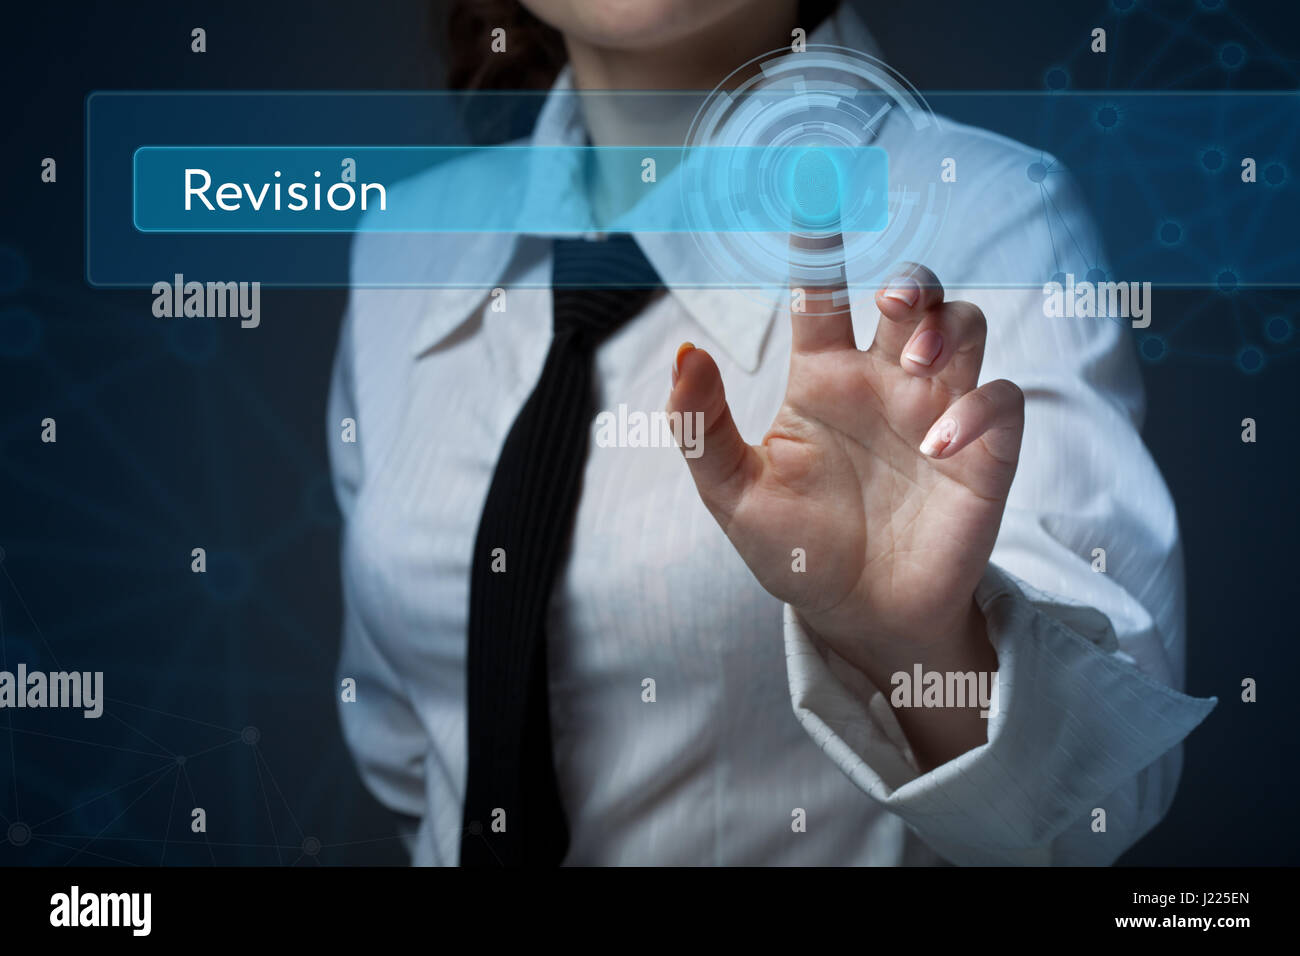 Business, technology, internet and networking concept. Business woman presses a button on the virtual screen: Revision Stock Photo